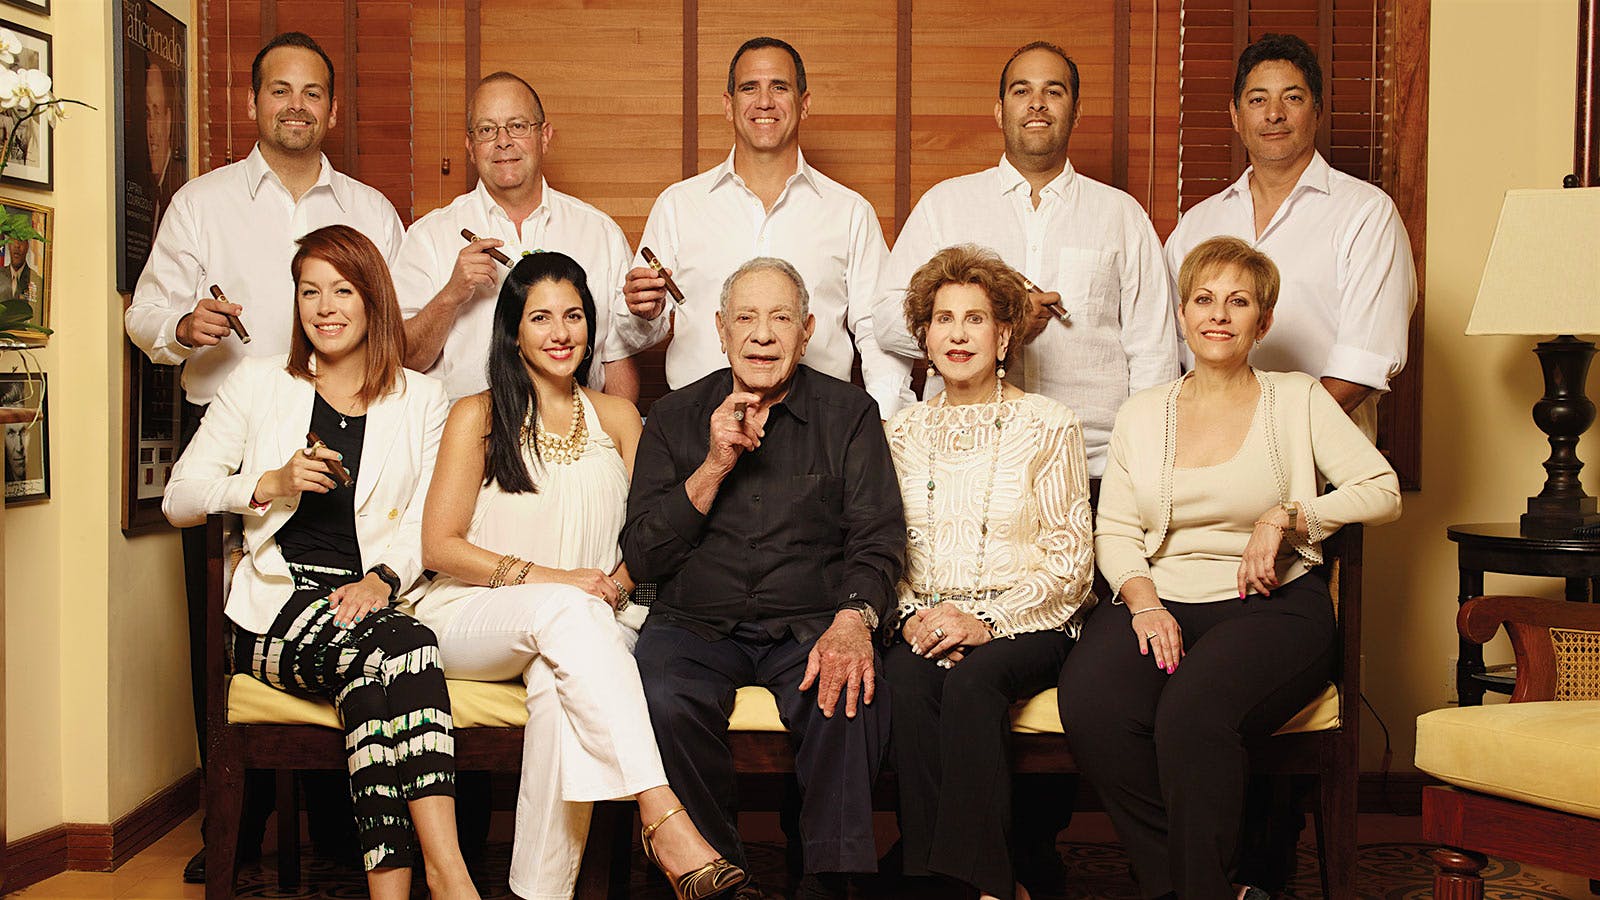 Padrón in 2014, surrounded by family.